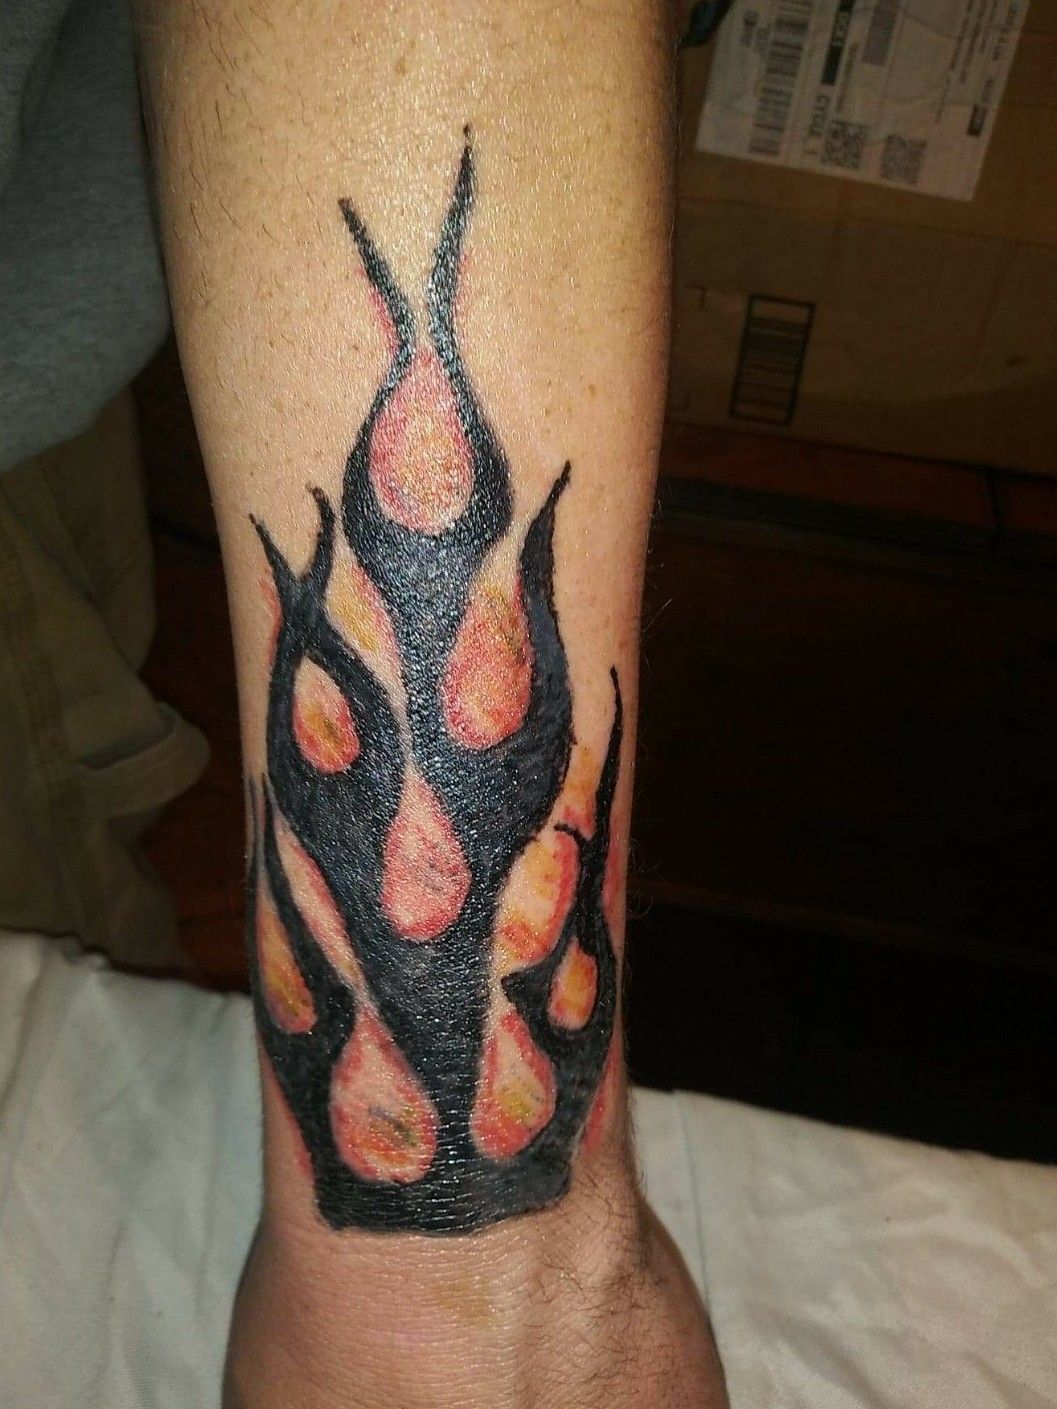 Tattoo uploaded by Judaz Jackzon • Black flames with some red yellow and orange $35 • Tattoodo